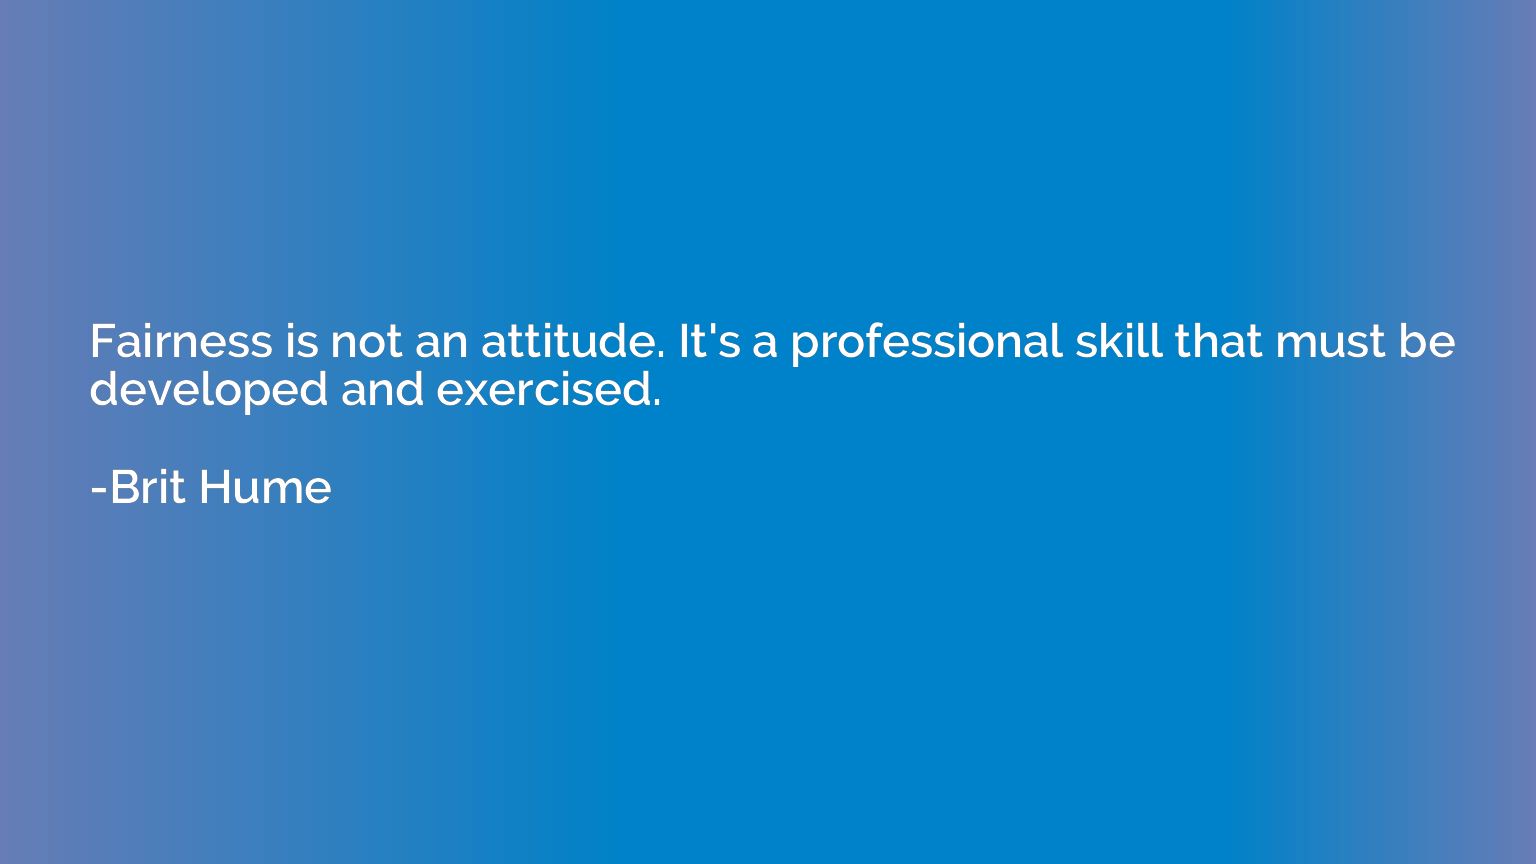 Fairness is not an attitude. It's a professional skill that 